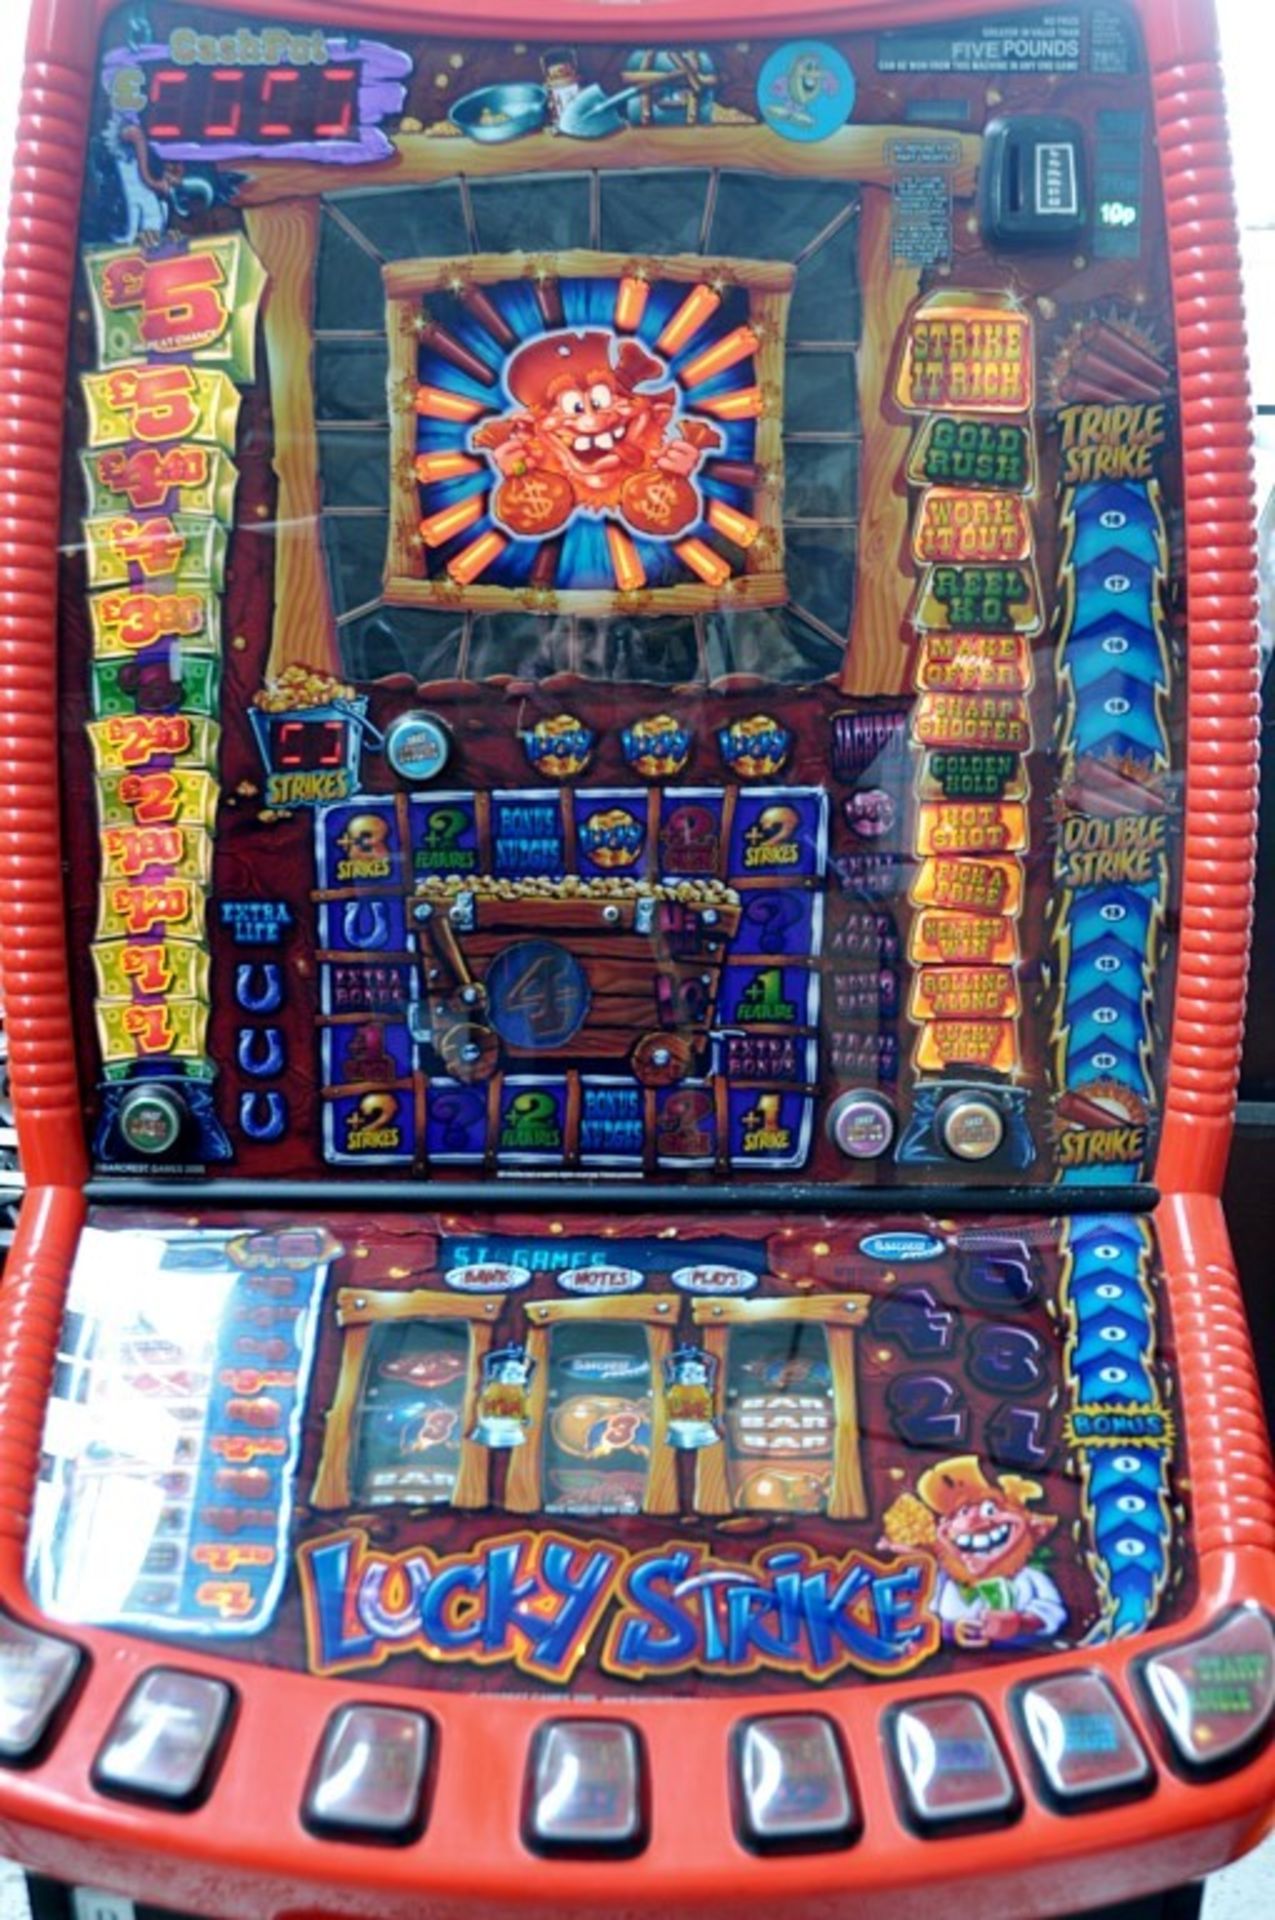 1 x "LUCKY STRIKE" Arcade Fruit Machine - Manufacturer: Barcrest (2005) - Pre-Owned In Good - Image 14 of 14